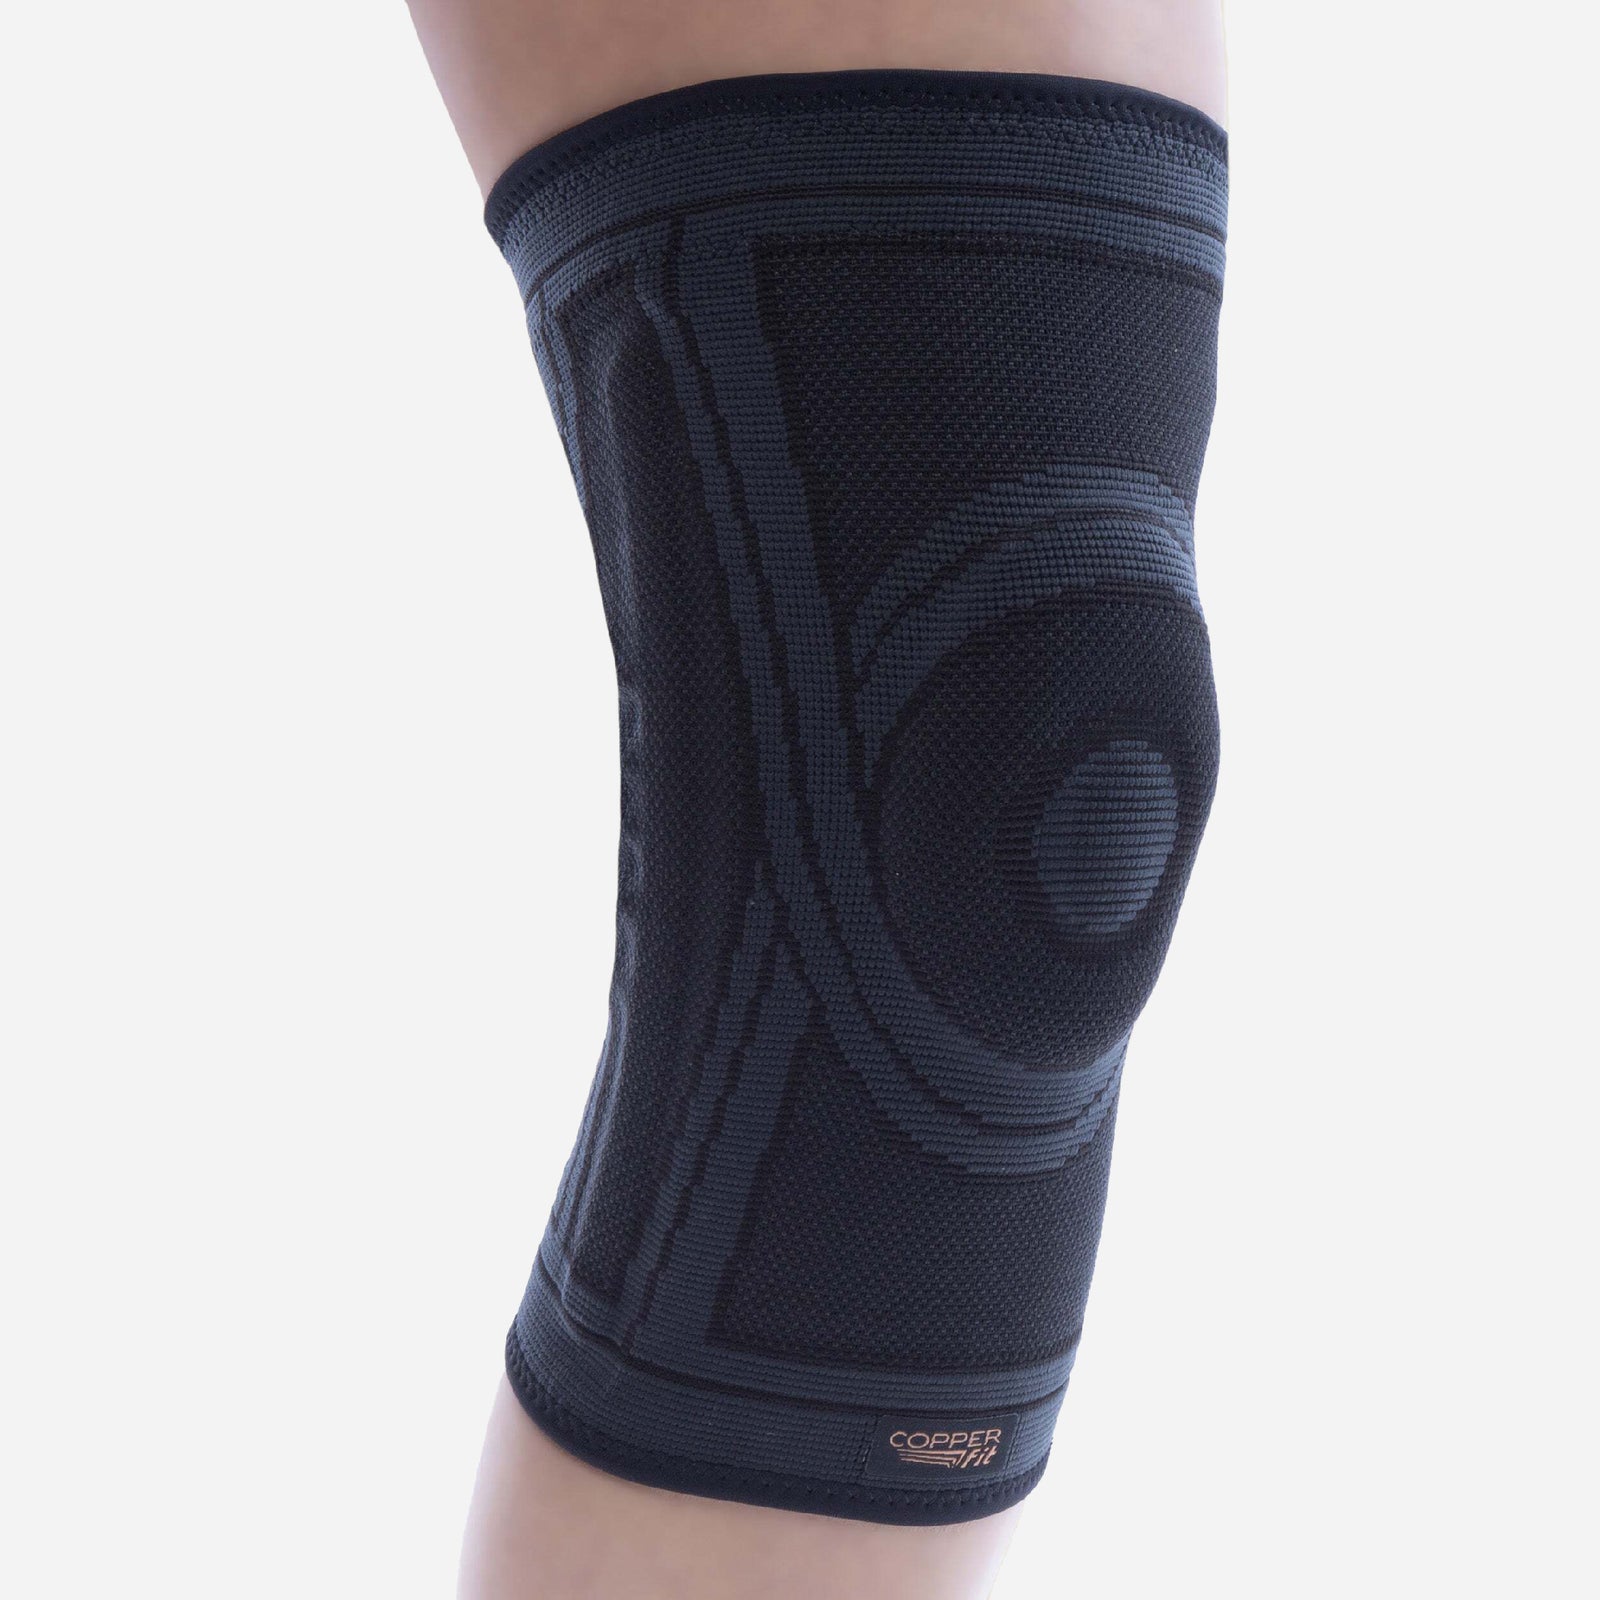 Copper Fit Copper Infused Compression Knee Sleeve Unisex Large (17-19)